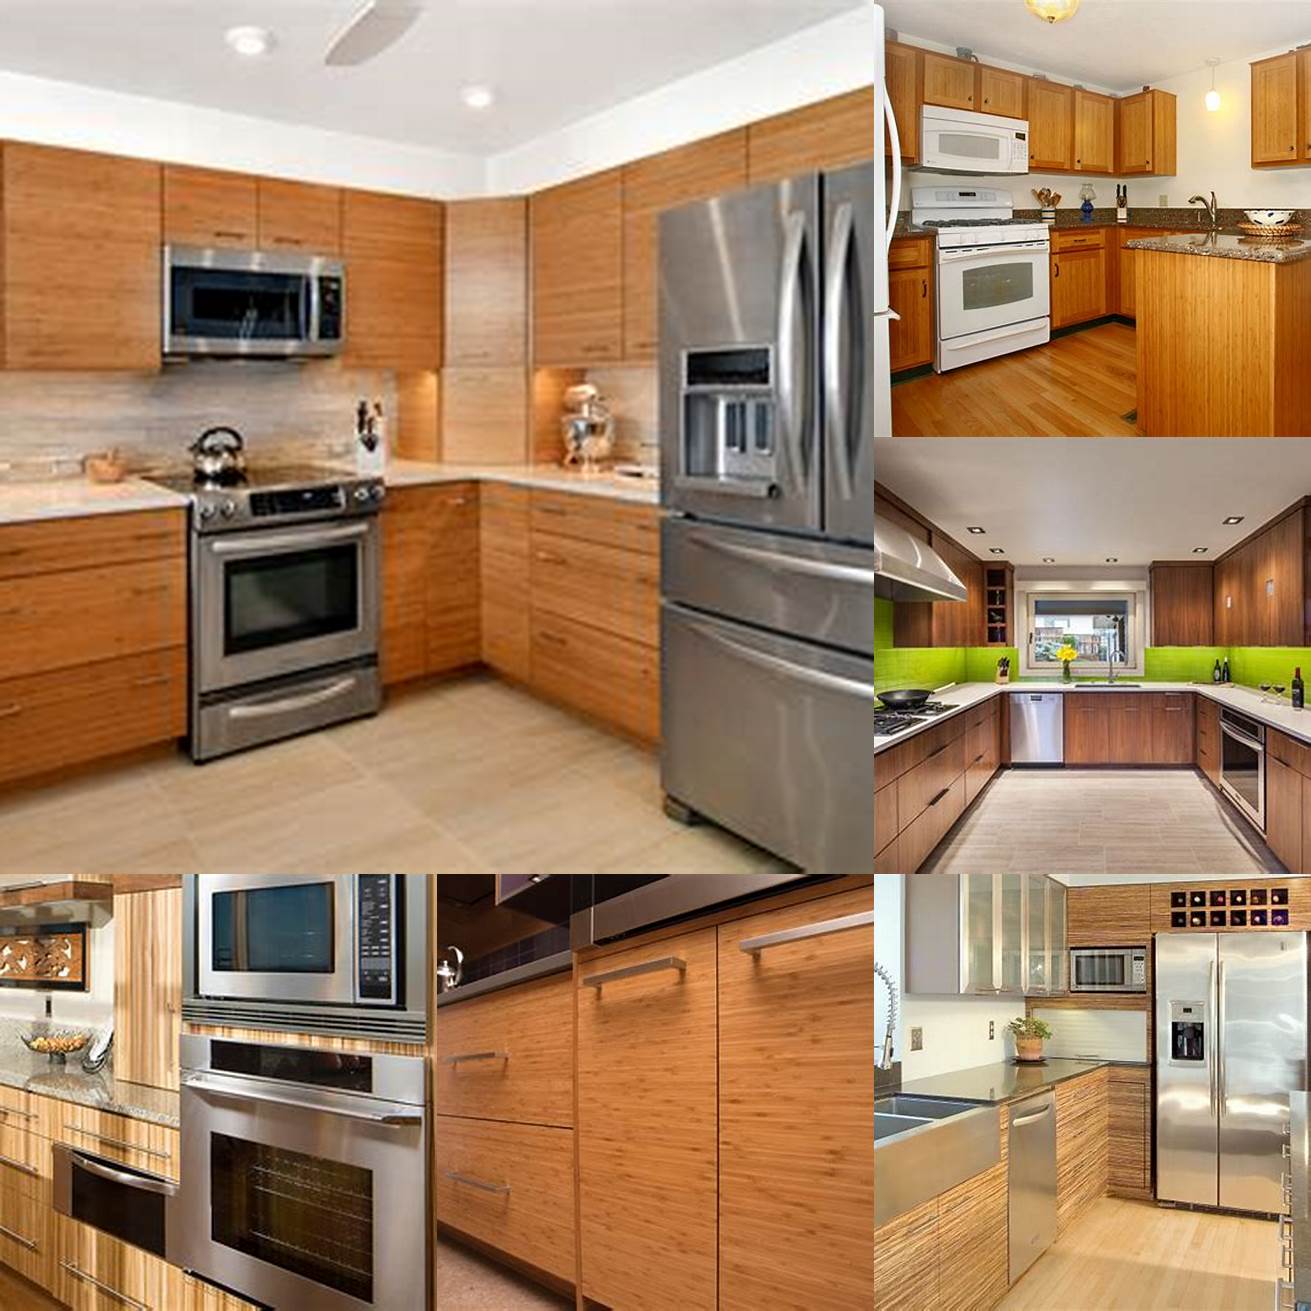 Bamboo kitchen cabinets with glass doors